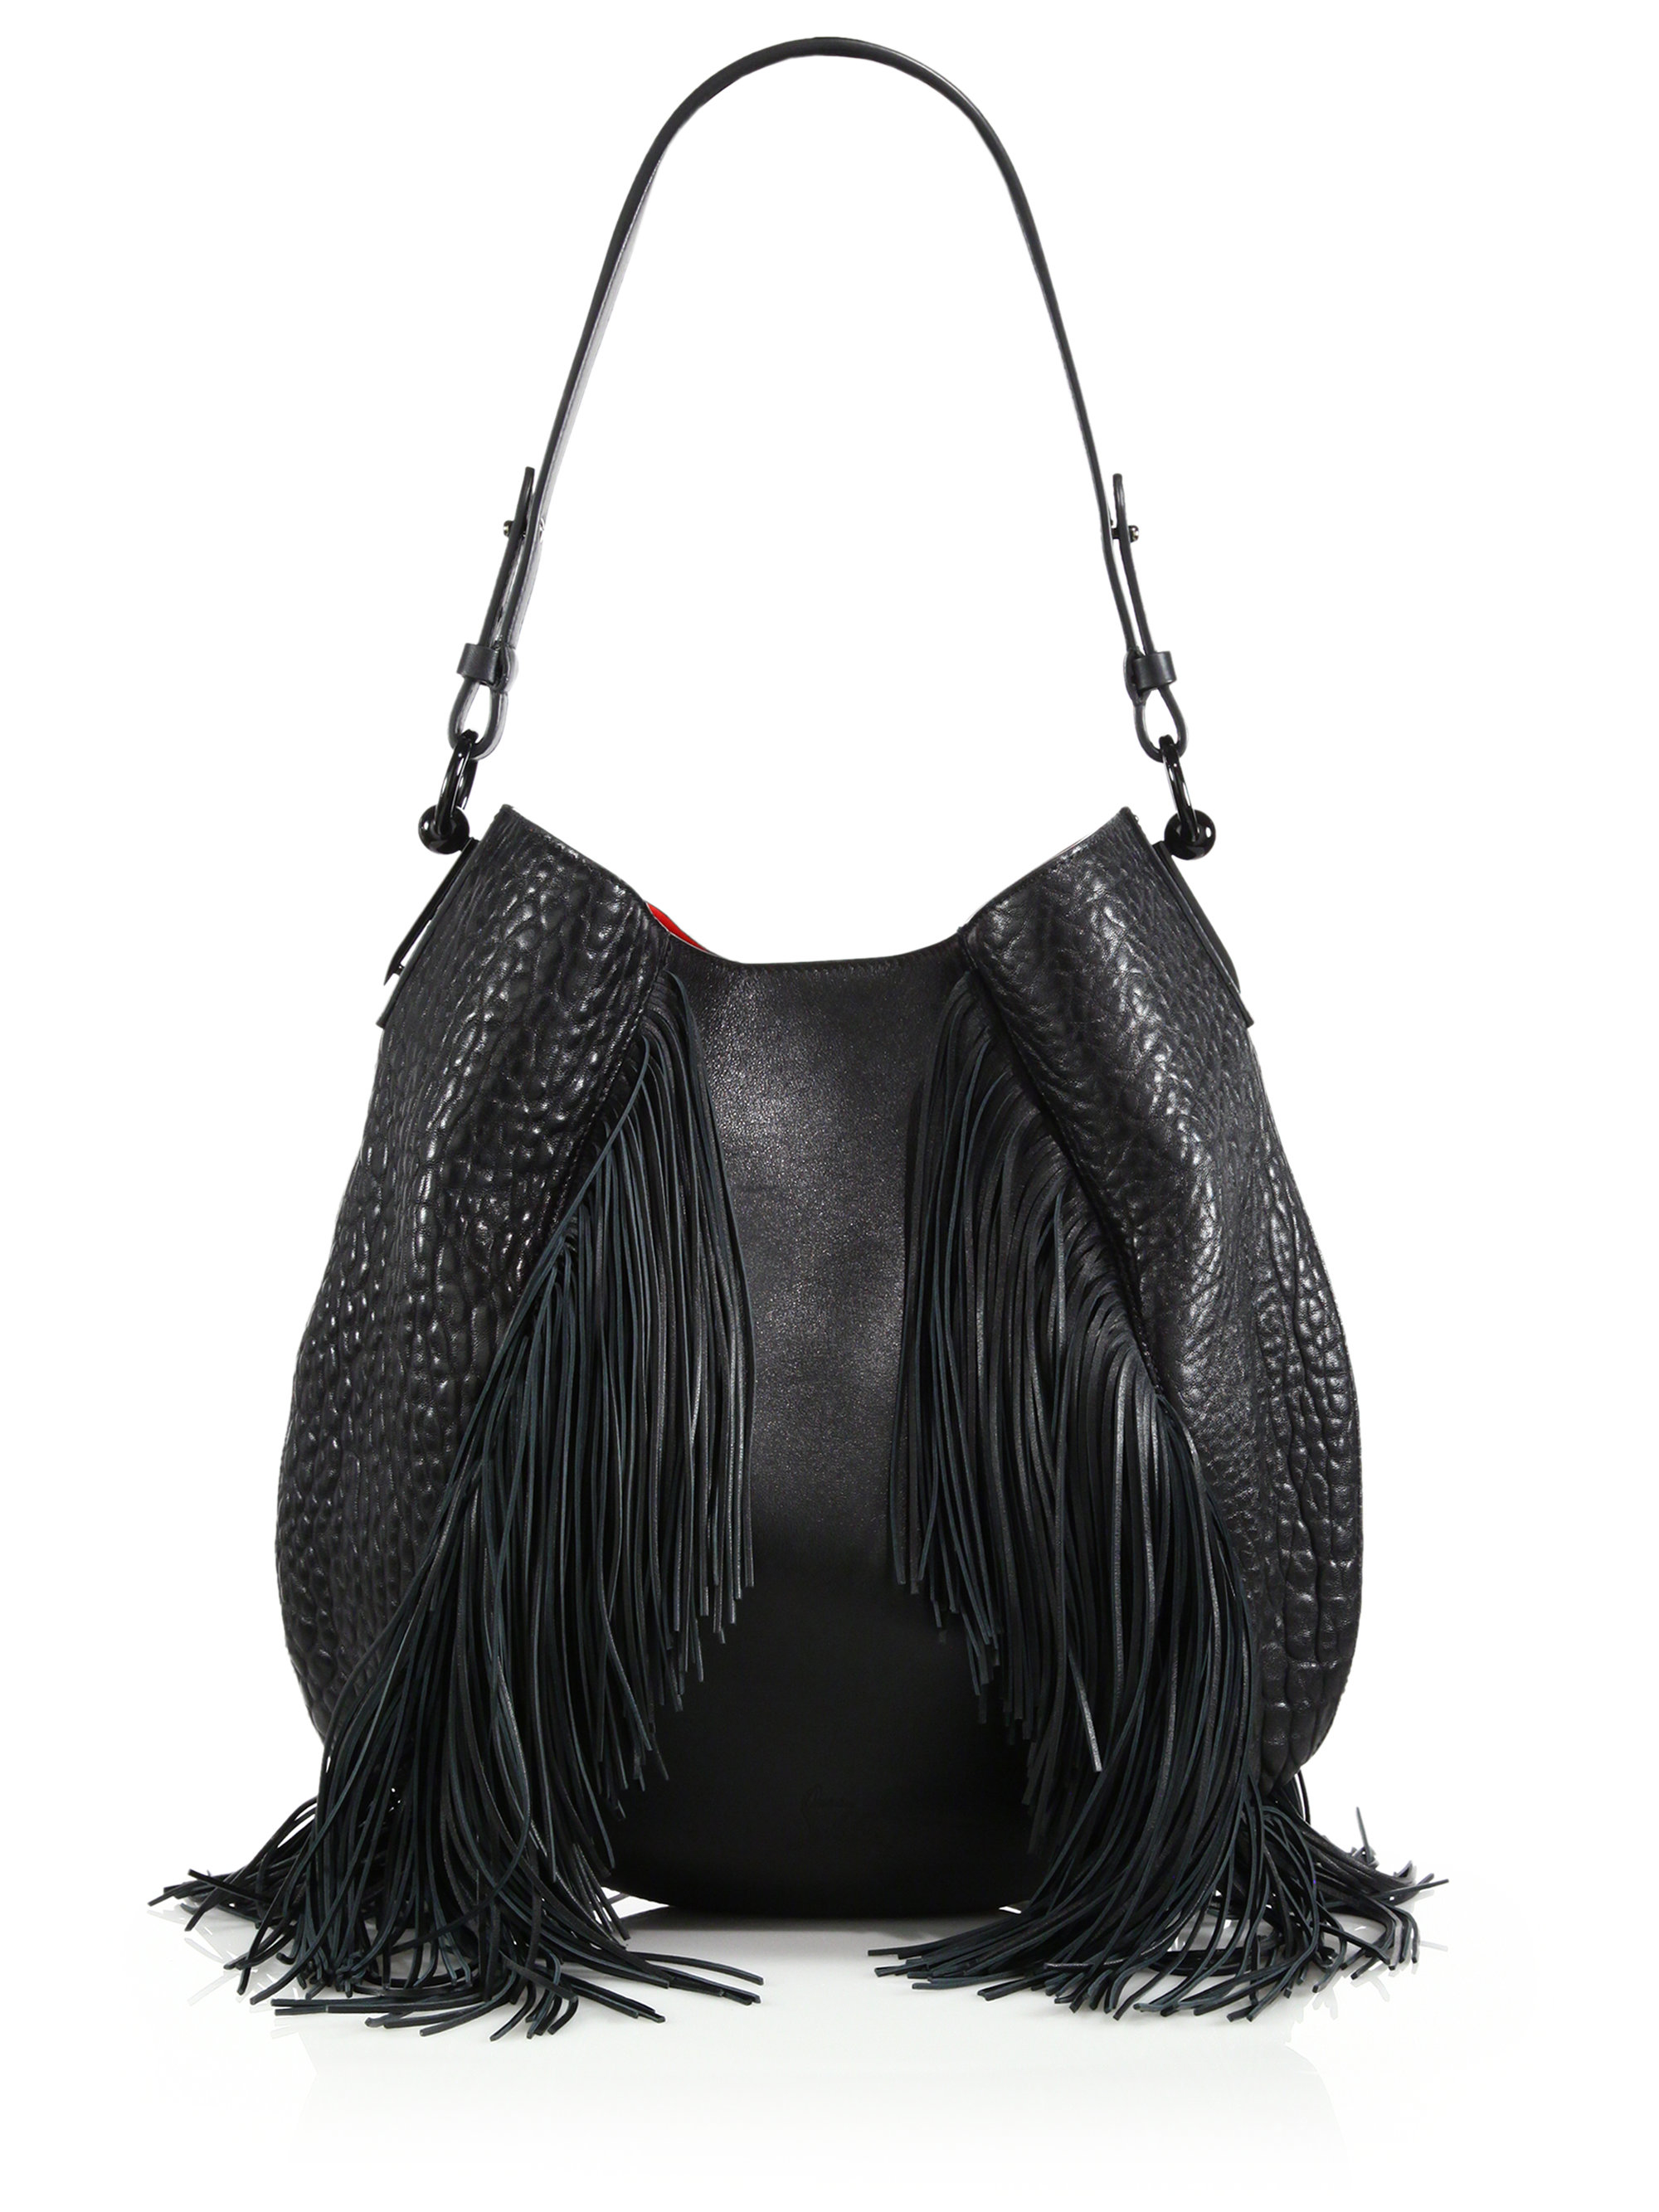 Lyst - Christian Louboutin Lucky L Fringed Pebbled Leather Hobo Bag in Black